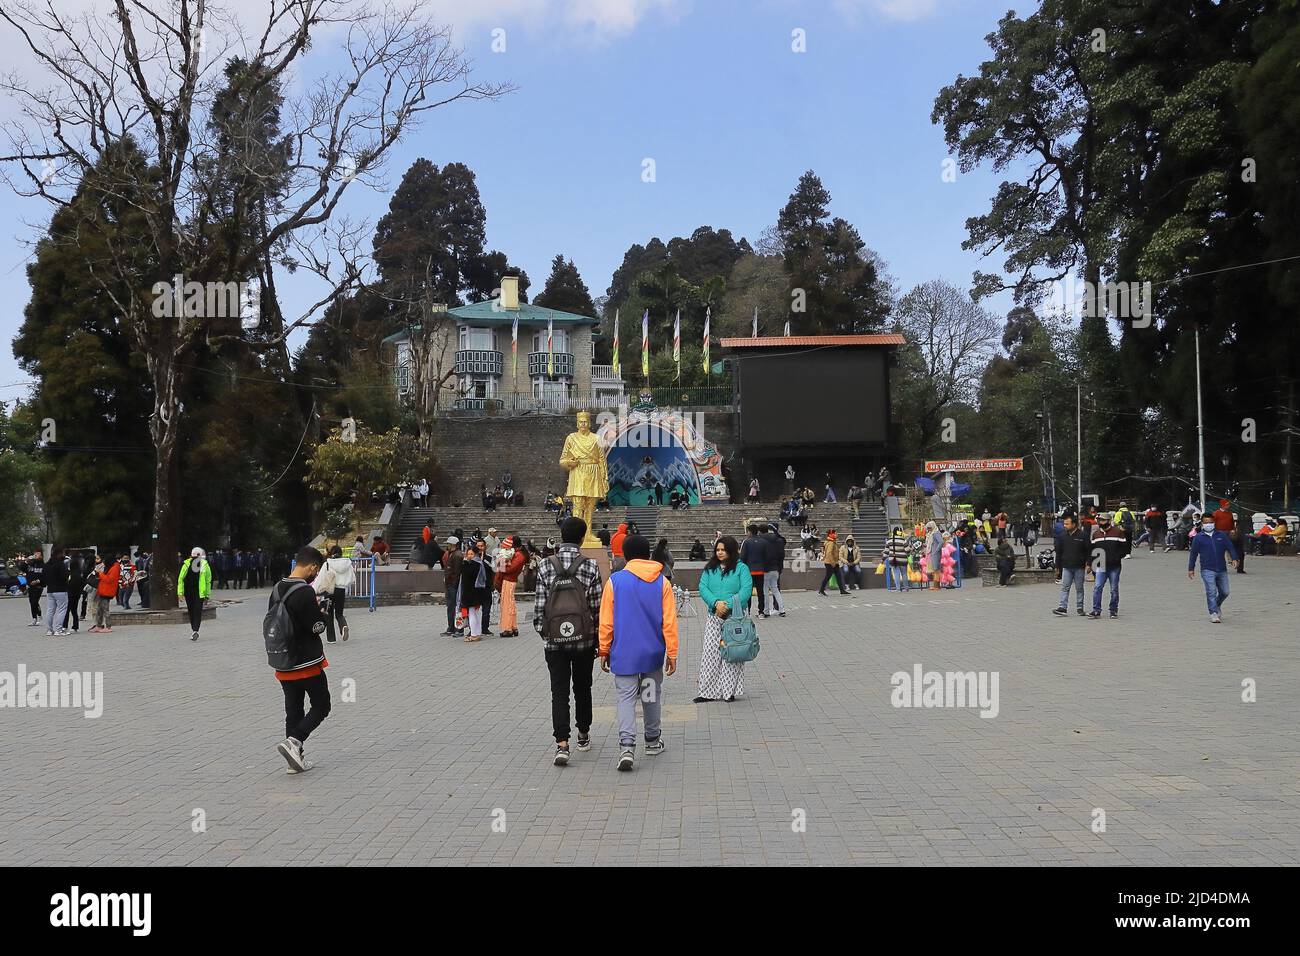 Darjeeling, West Bengal, India - 15th February 2022: crowd of people having fun on their post covid travel trip at darjeeling mall Stock Photo